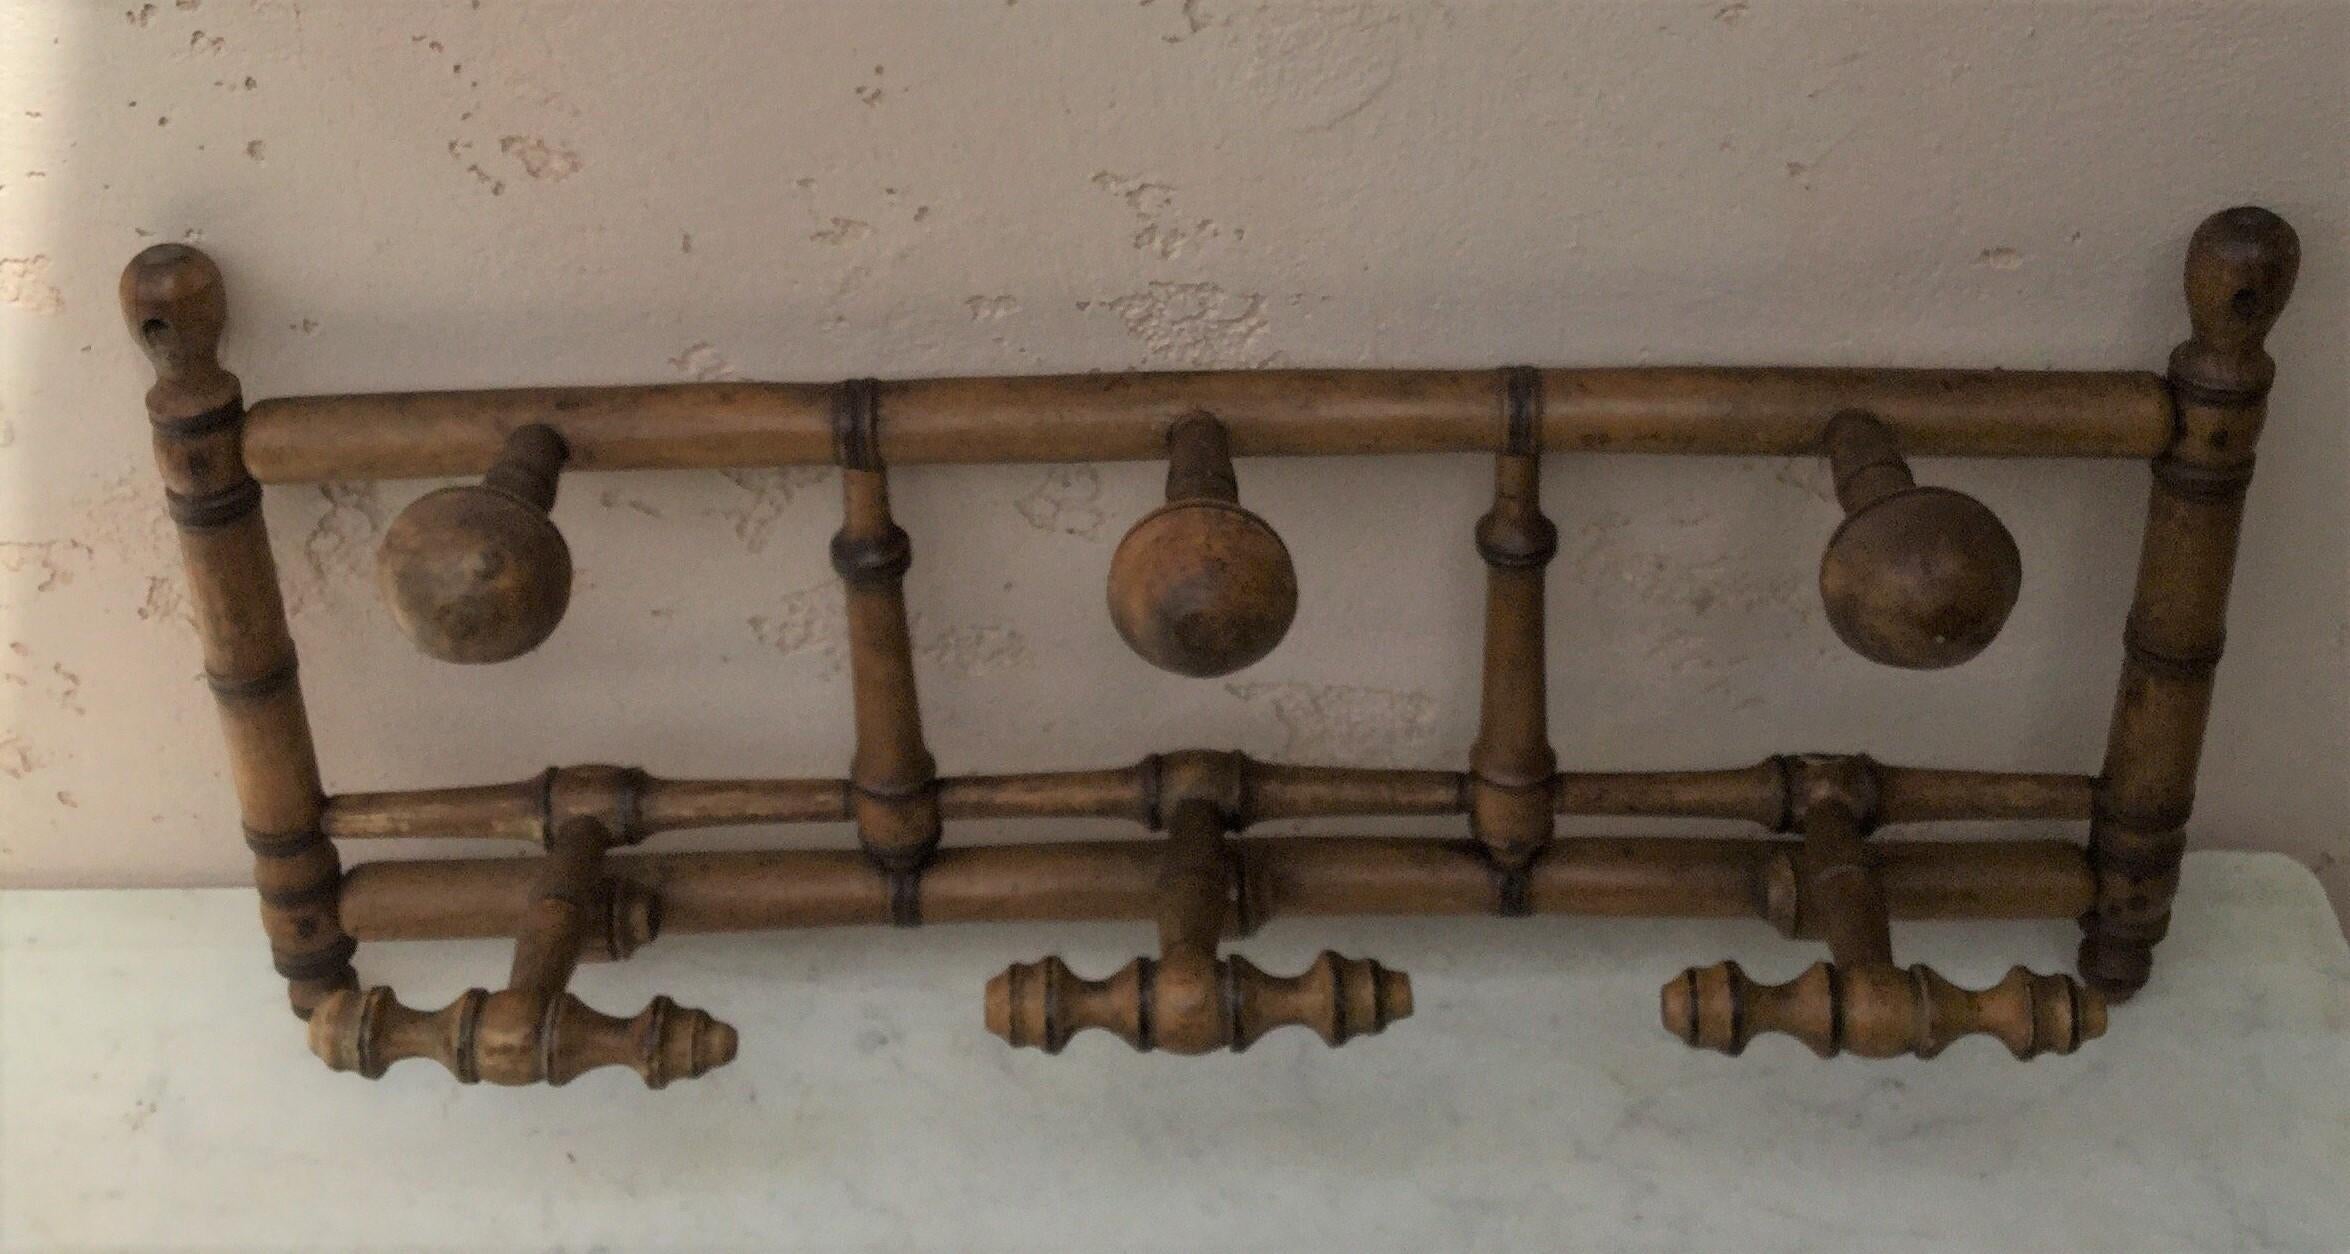 Faux bamboo coat rack circa 1900 with 3 hooks.